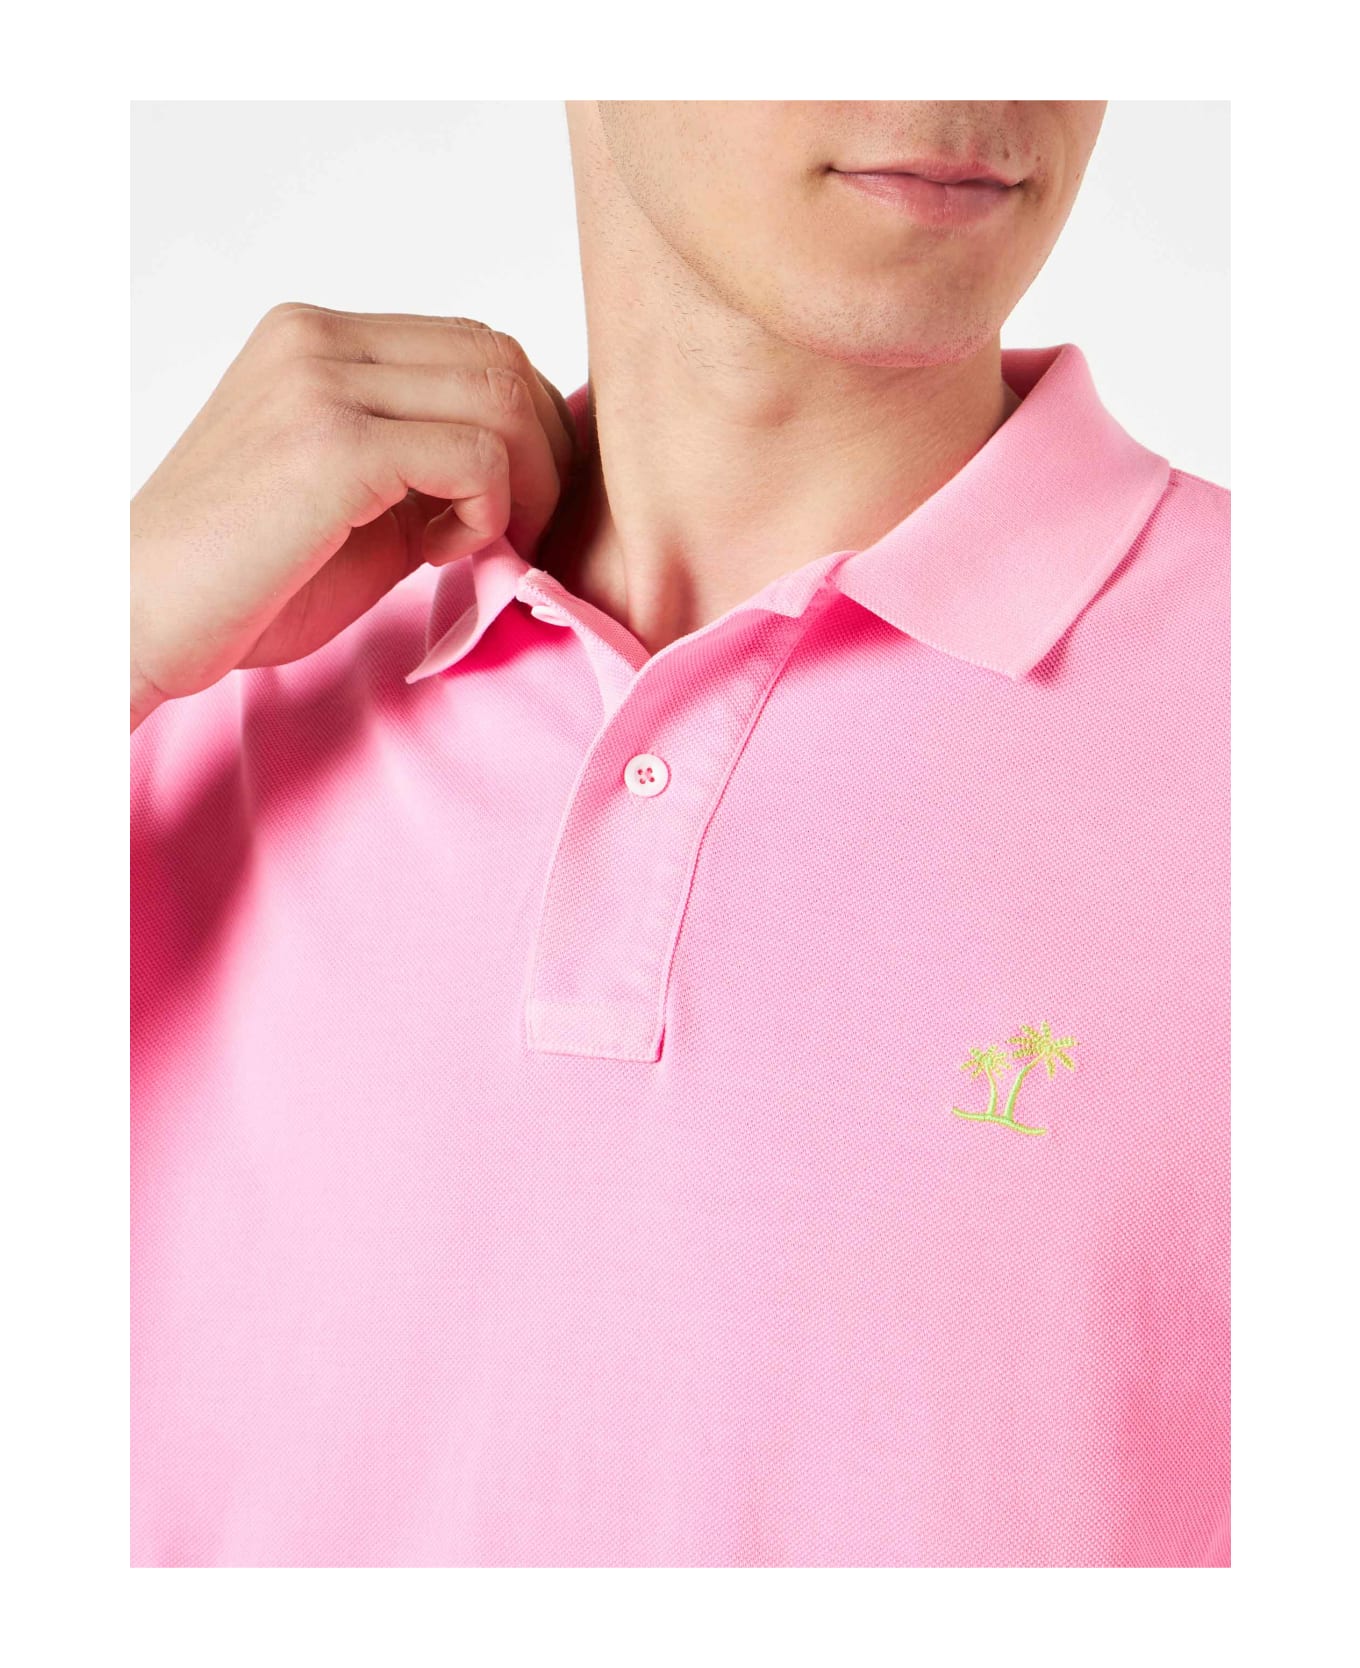 MC2 Saint Barth Pink Piquet Polo With St. Barth Logo And Vintage Effect - FLUO